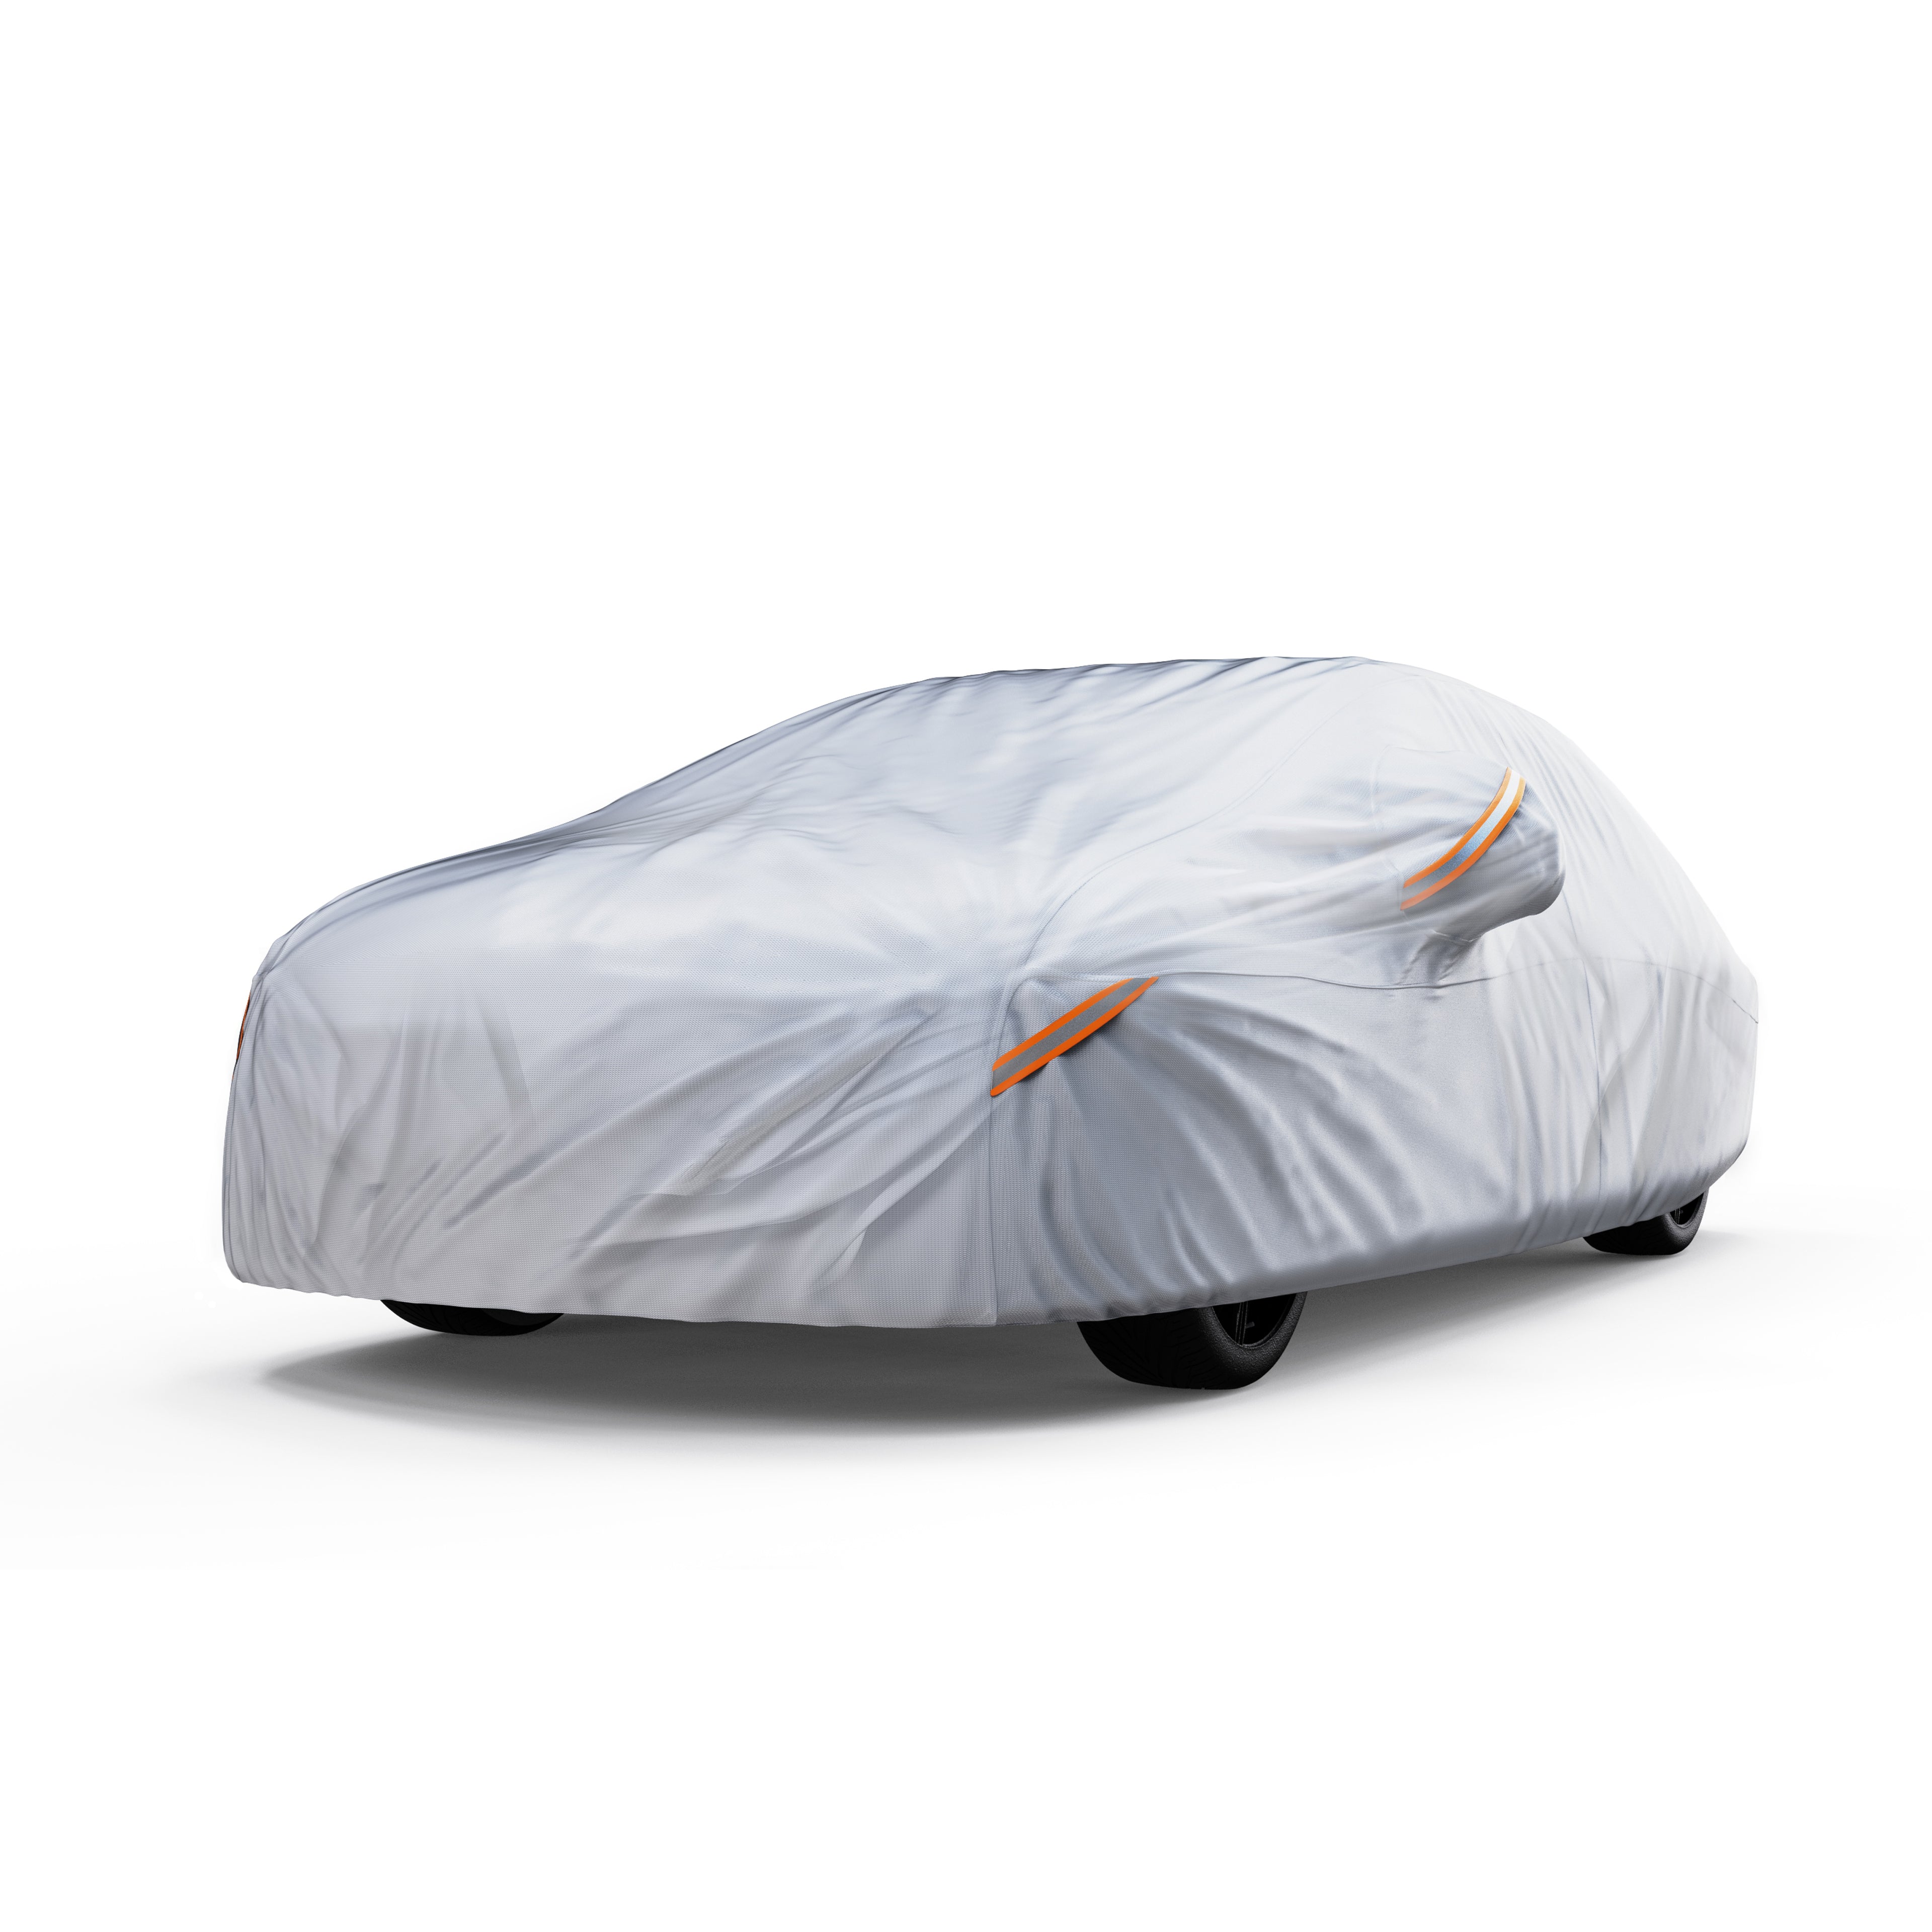 Waterproof All Weather Car Cover compatible with 1998-2011 Volkswagen Beetle, Heavy Duty Outdoor/Indoor Protection, Max Protection from Sun Rain Wind & Snow